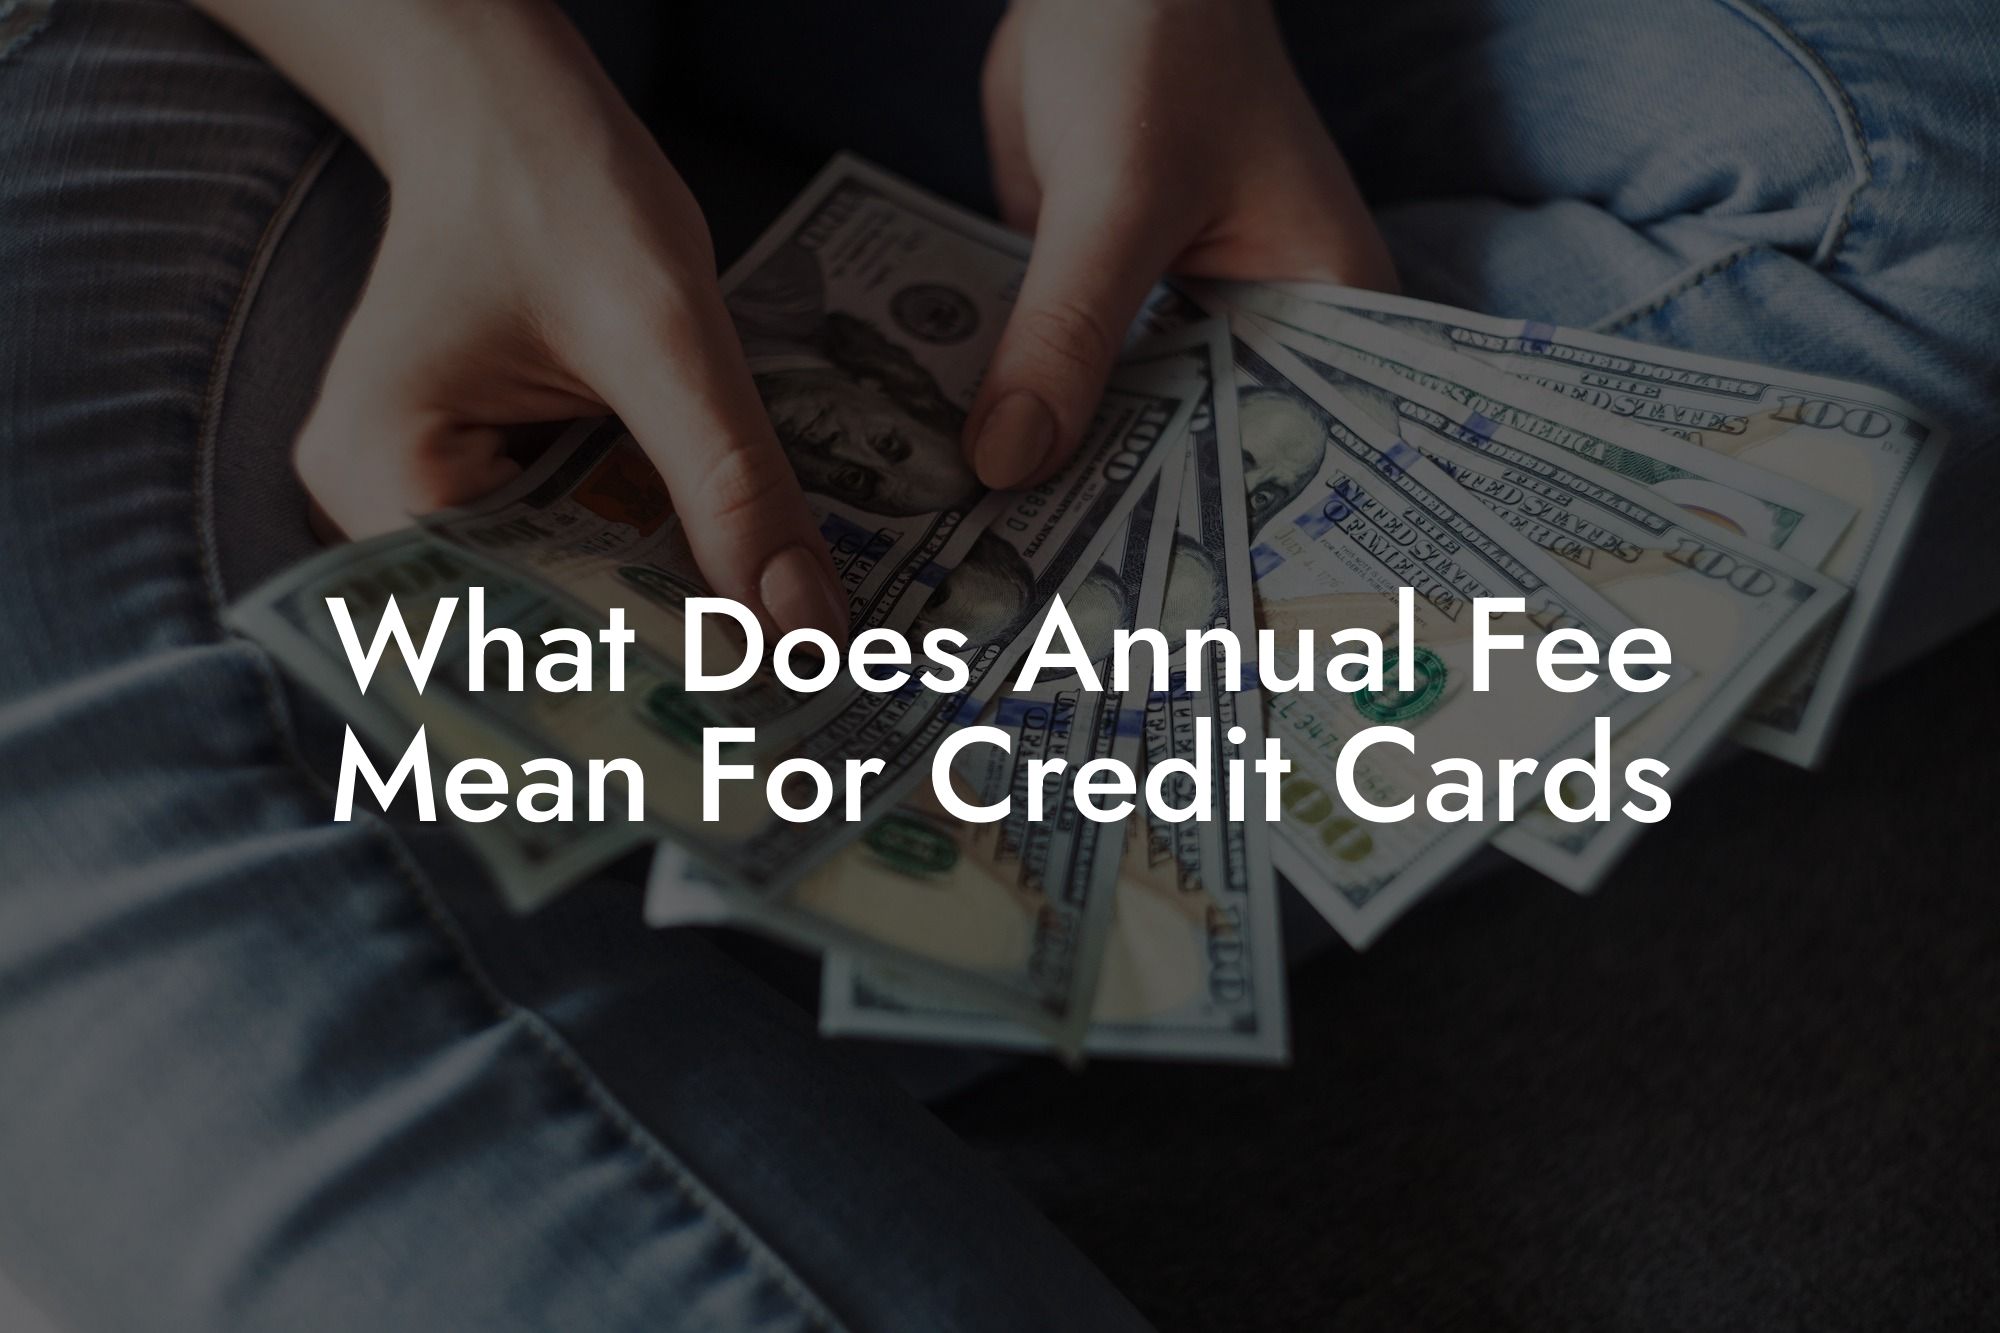 What Does Annual Fee Mean For Credit Cards